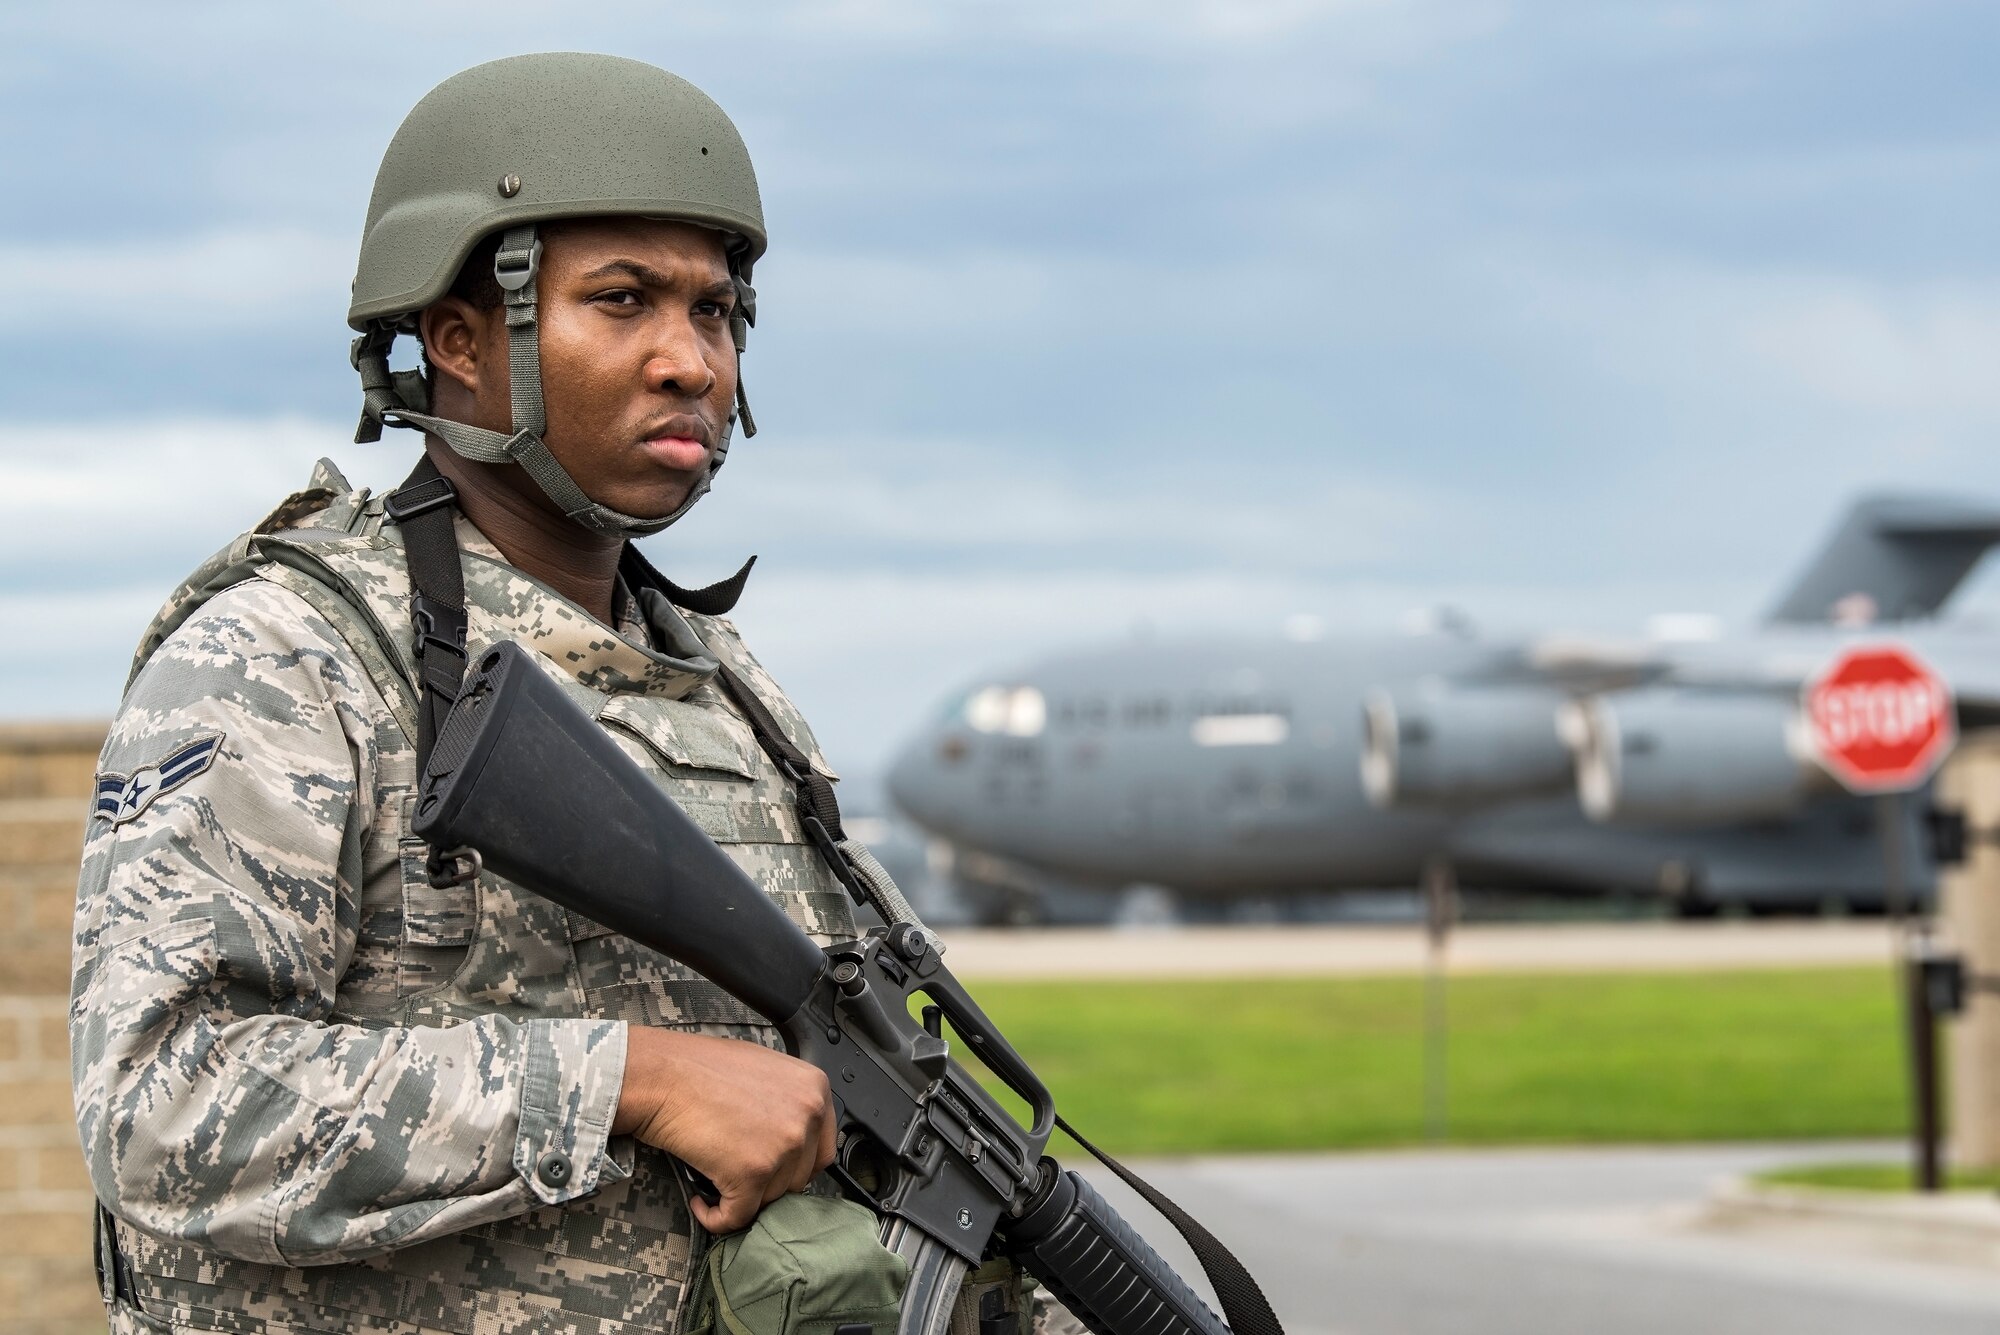 Airman 1st Class Denzel Gills, 9th Airlift Squadron aviation research management journeyman, stands guard near a flight line vehicle access gate Sept. 17, 2018, on Dover Air Force Base, Del. Gills was one of 34 Integrated Base Defense certified individuals who provided security for personnel and base assets during a two-day Force Protection/Major Accident Response Exercise. (U.S. Air Force photo by Roland Balik)